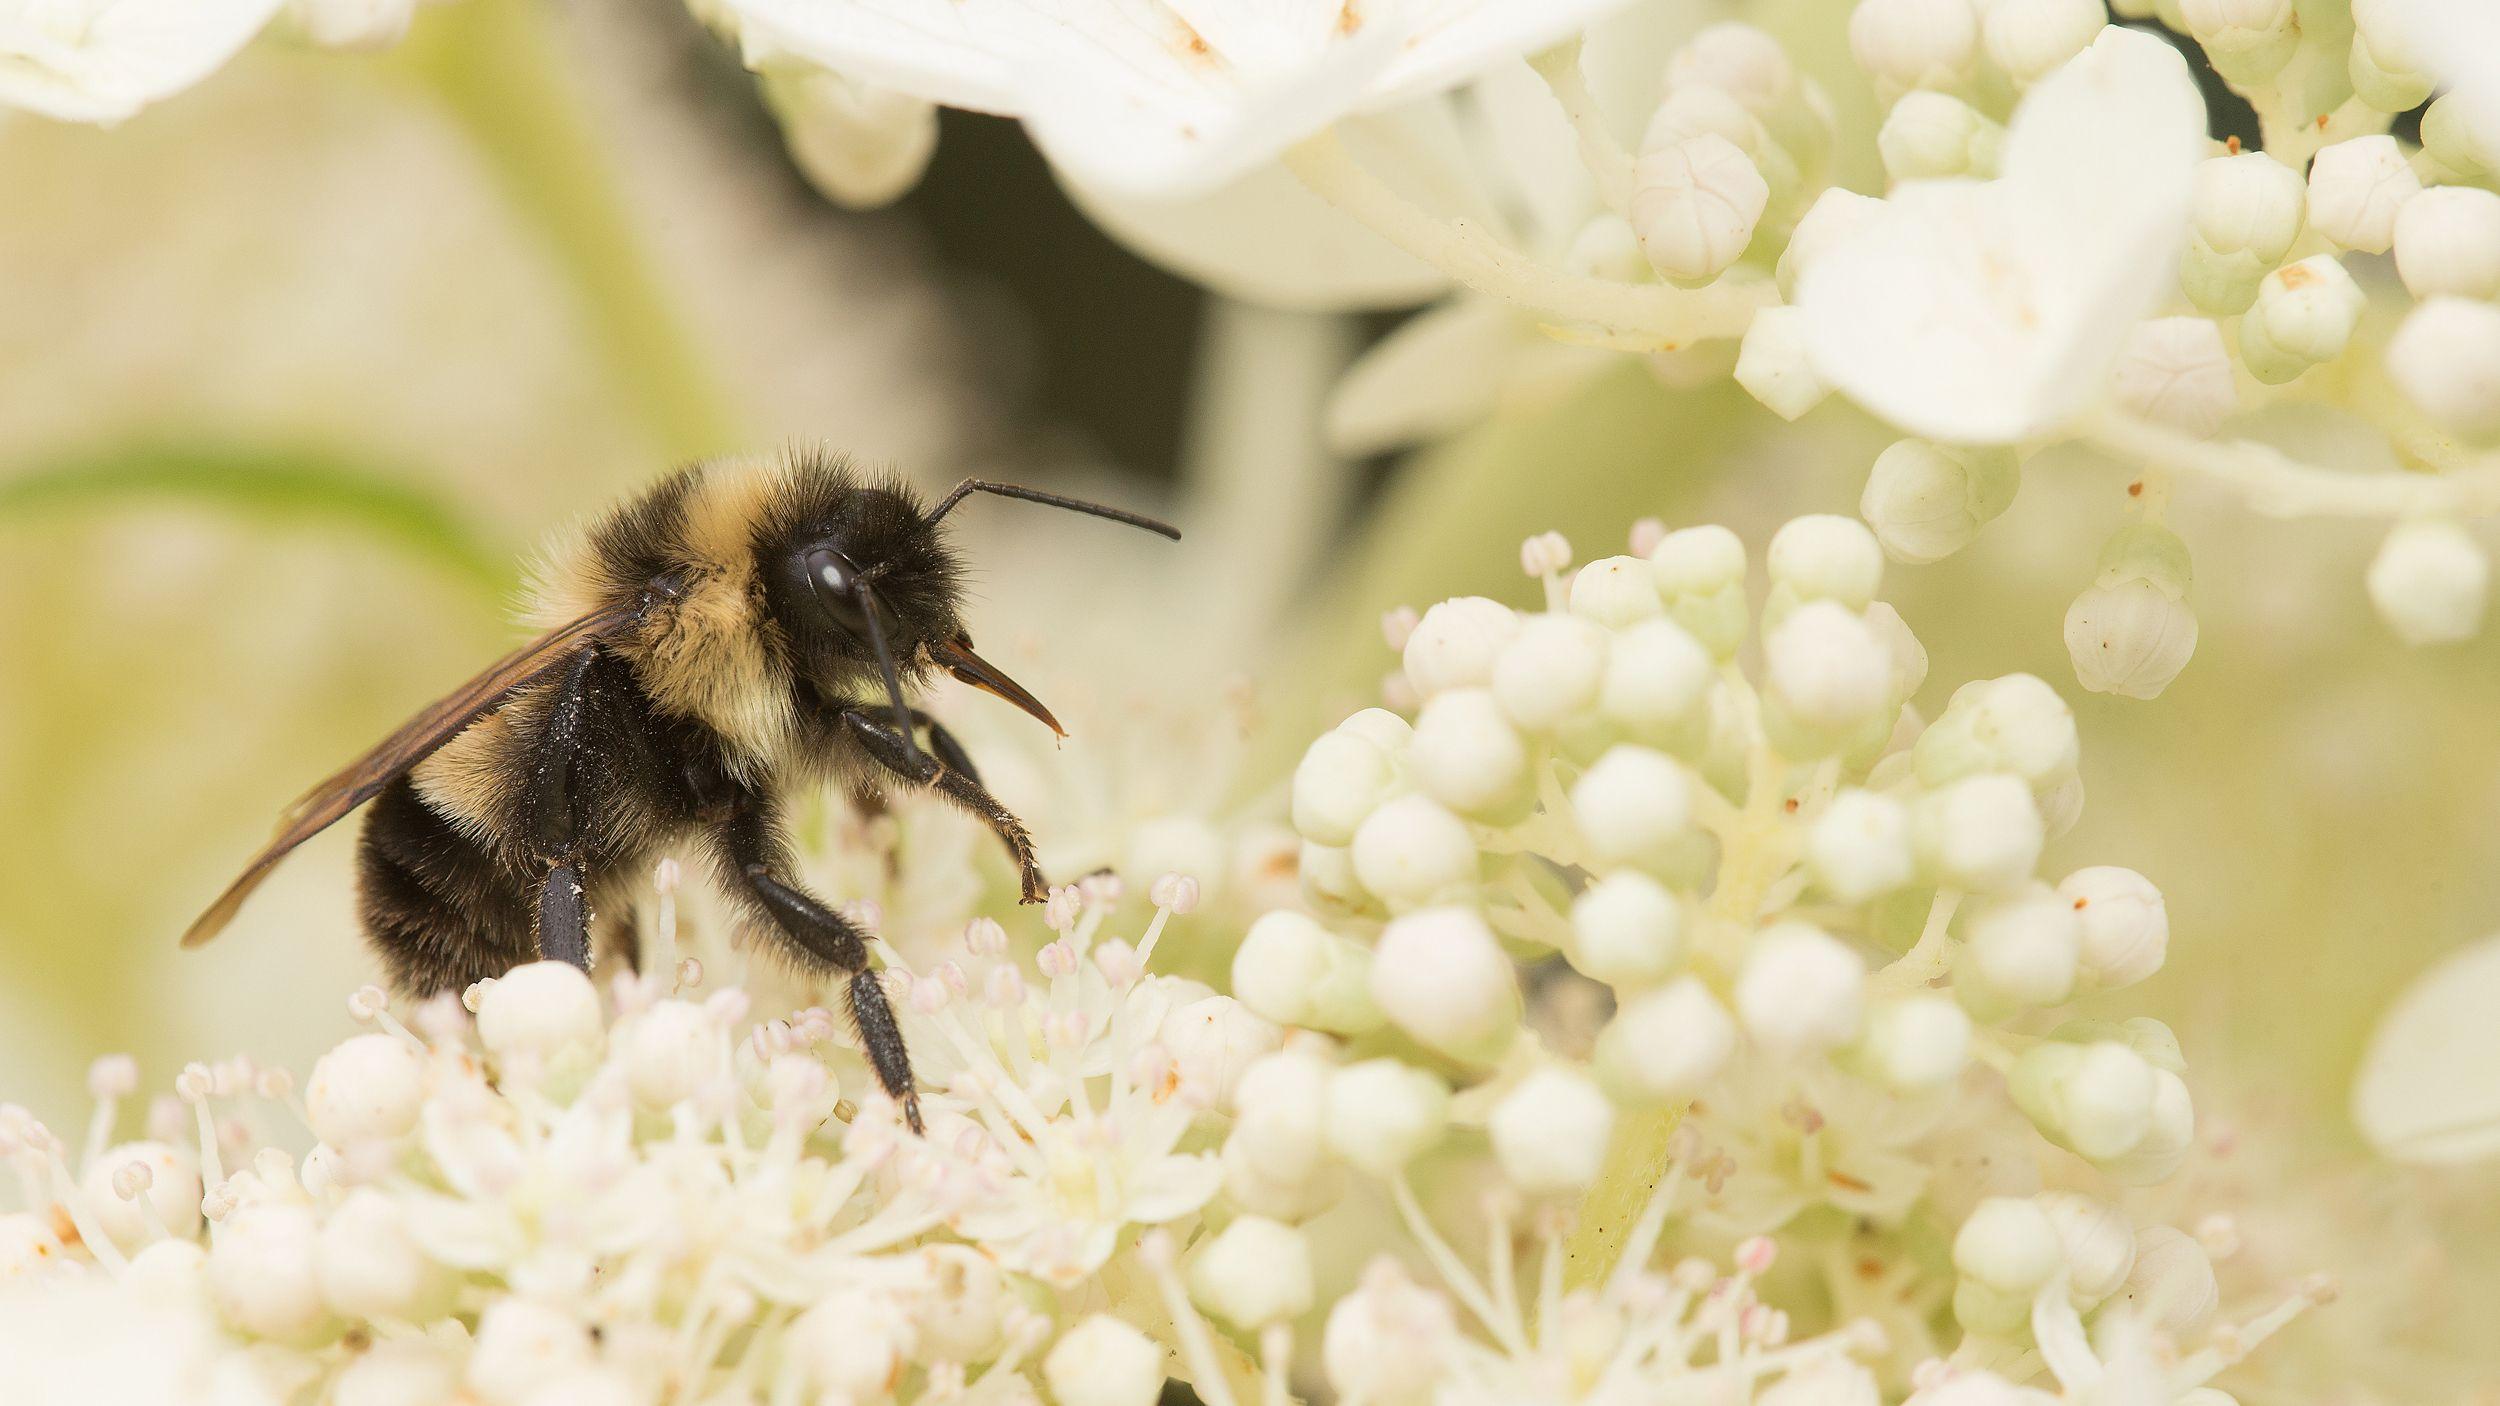 Recovery: Bringing Back Bumble Bees